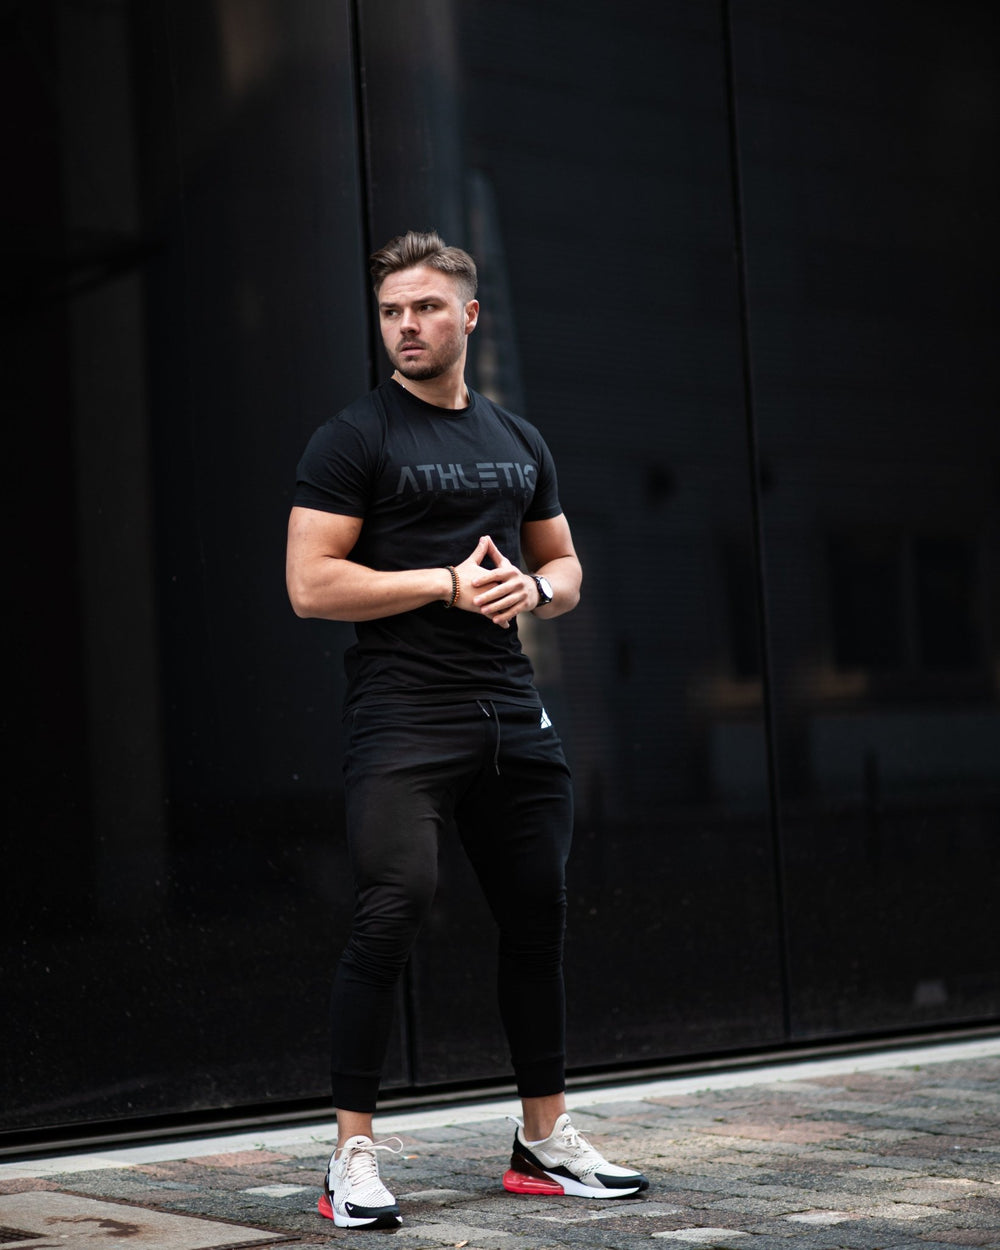 Classic Fit (Shadow) - Athletic Aesthetics